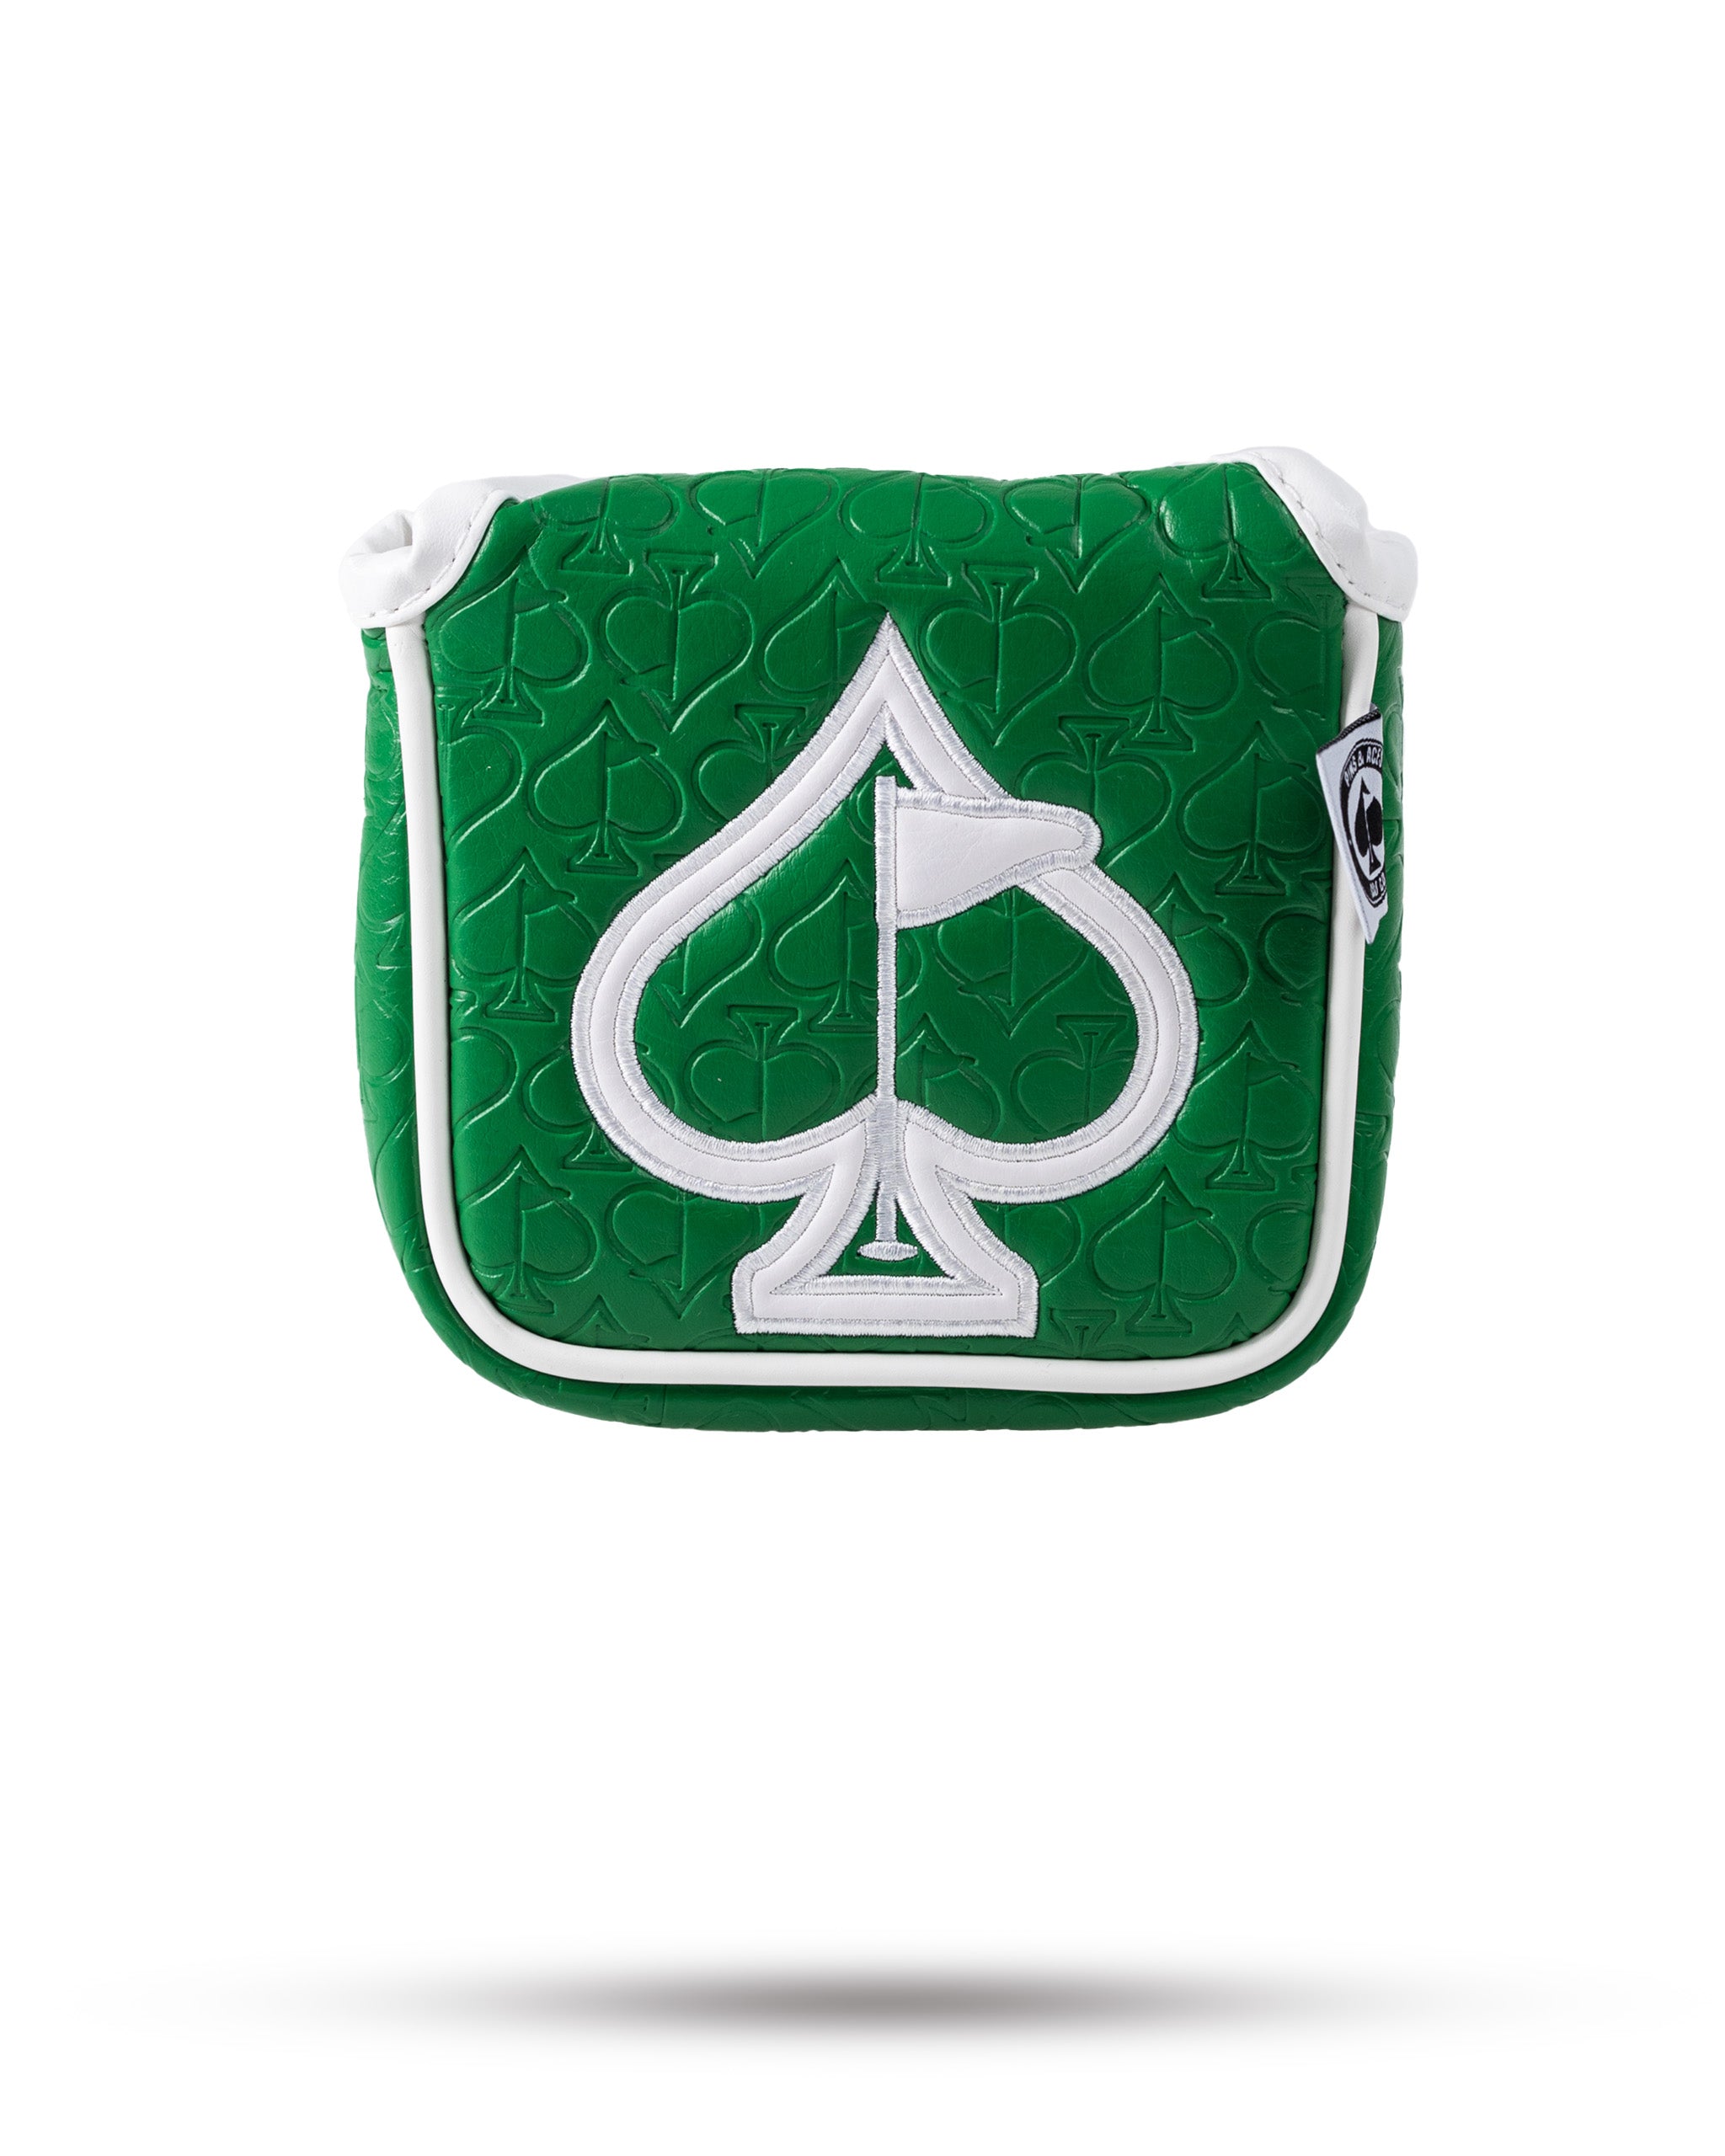 Embossed Spade Mallet Putter Cover - Green